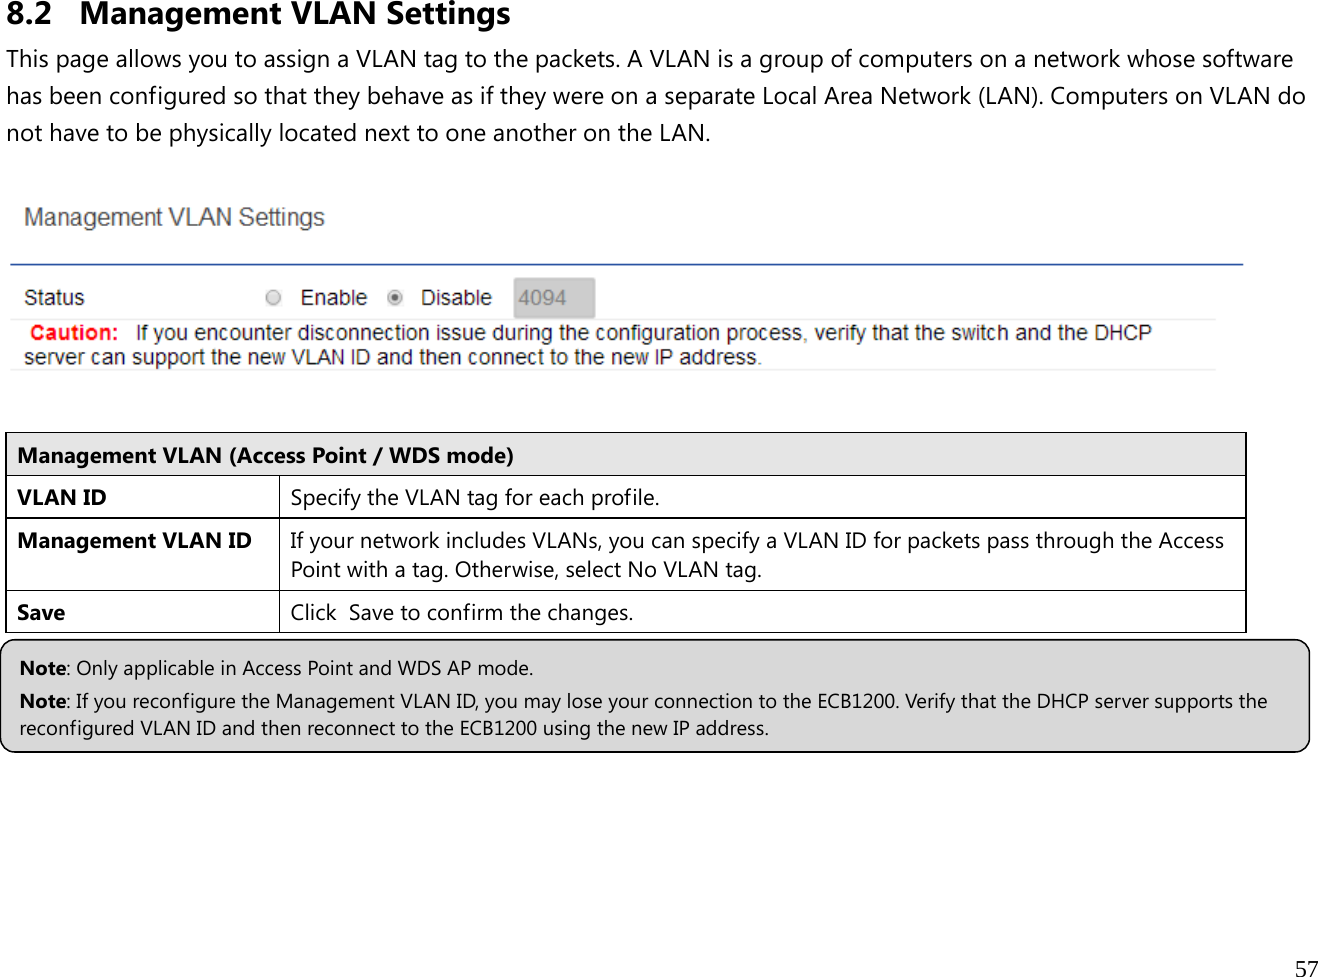  57  8.2 Management VLAN Settings This page allows you to assign a VLAN tag to the packets. A VLAN is a group of computers on a network whose software has been configured so that they behave as if they were on a separate Local Area Network (LAN). Computers on VLAN do not have to be physically located next to one another on the LAN.    Management VLAN (Access Point / WDS mode) VLAN ID Specify the VLAN tag for each profile.Management VLAN ID  If your network includes VLANs, you can specify a VLAN ID for packets pass through the Access Point with a tag. Otherwise, select No VLAN tag. Save Click  Save to confirm the changes.      Note: Only applicable in Access Point and WDS AP mode. Note: If you reconfigure the Management VLAN ID, you may lose your connection to the ECB1200. Verify that the DHCP server supports the reconfigured VLAN ID and then reconnect to the ECB1200 using the new IP address.  